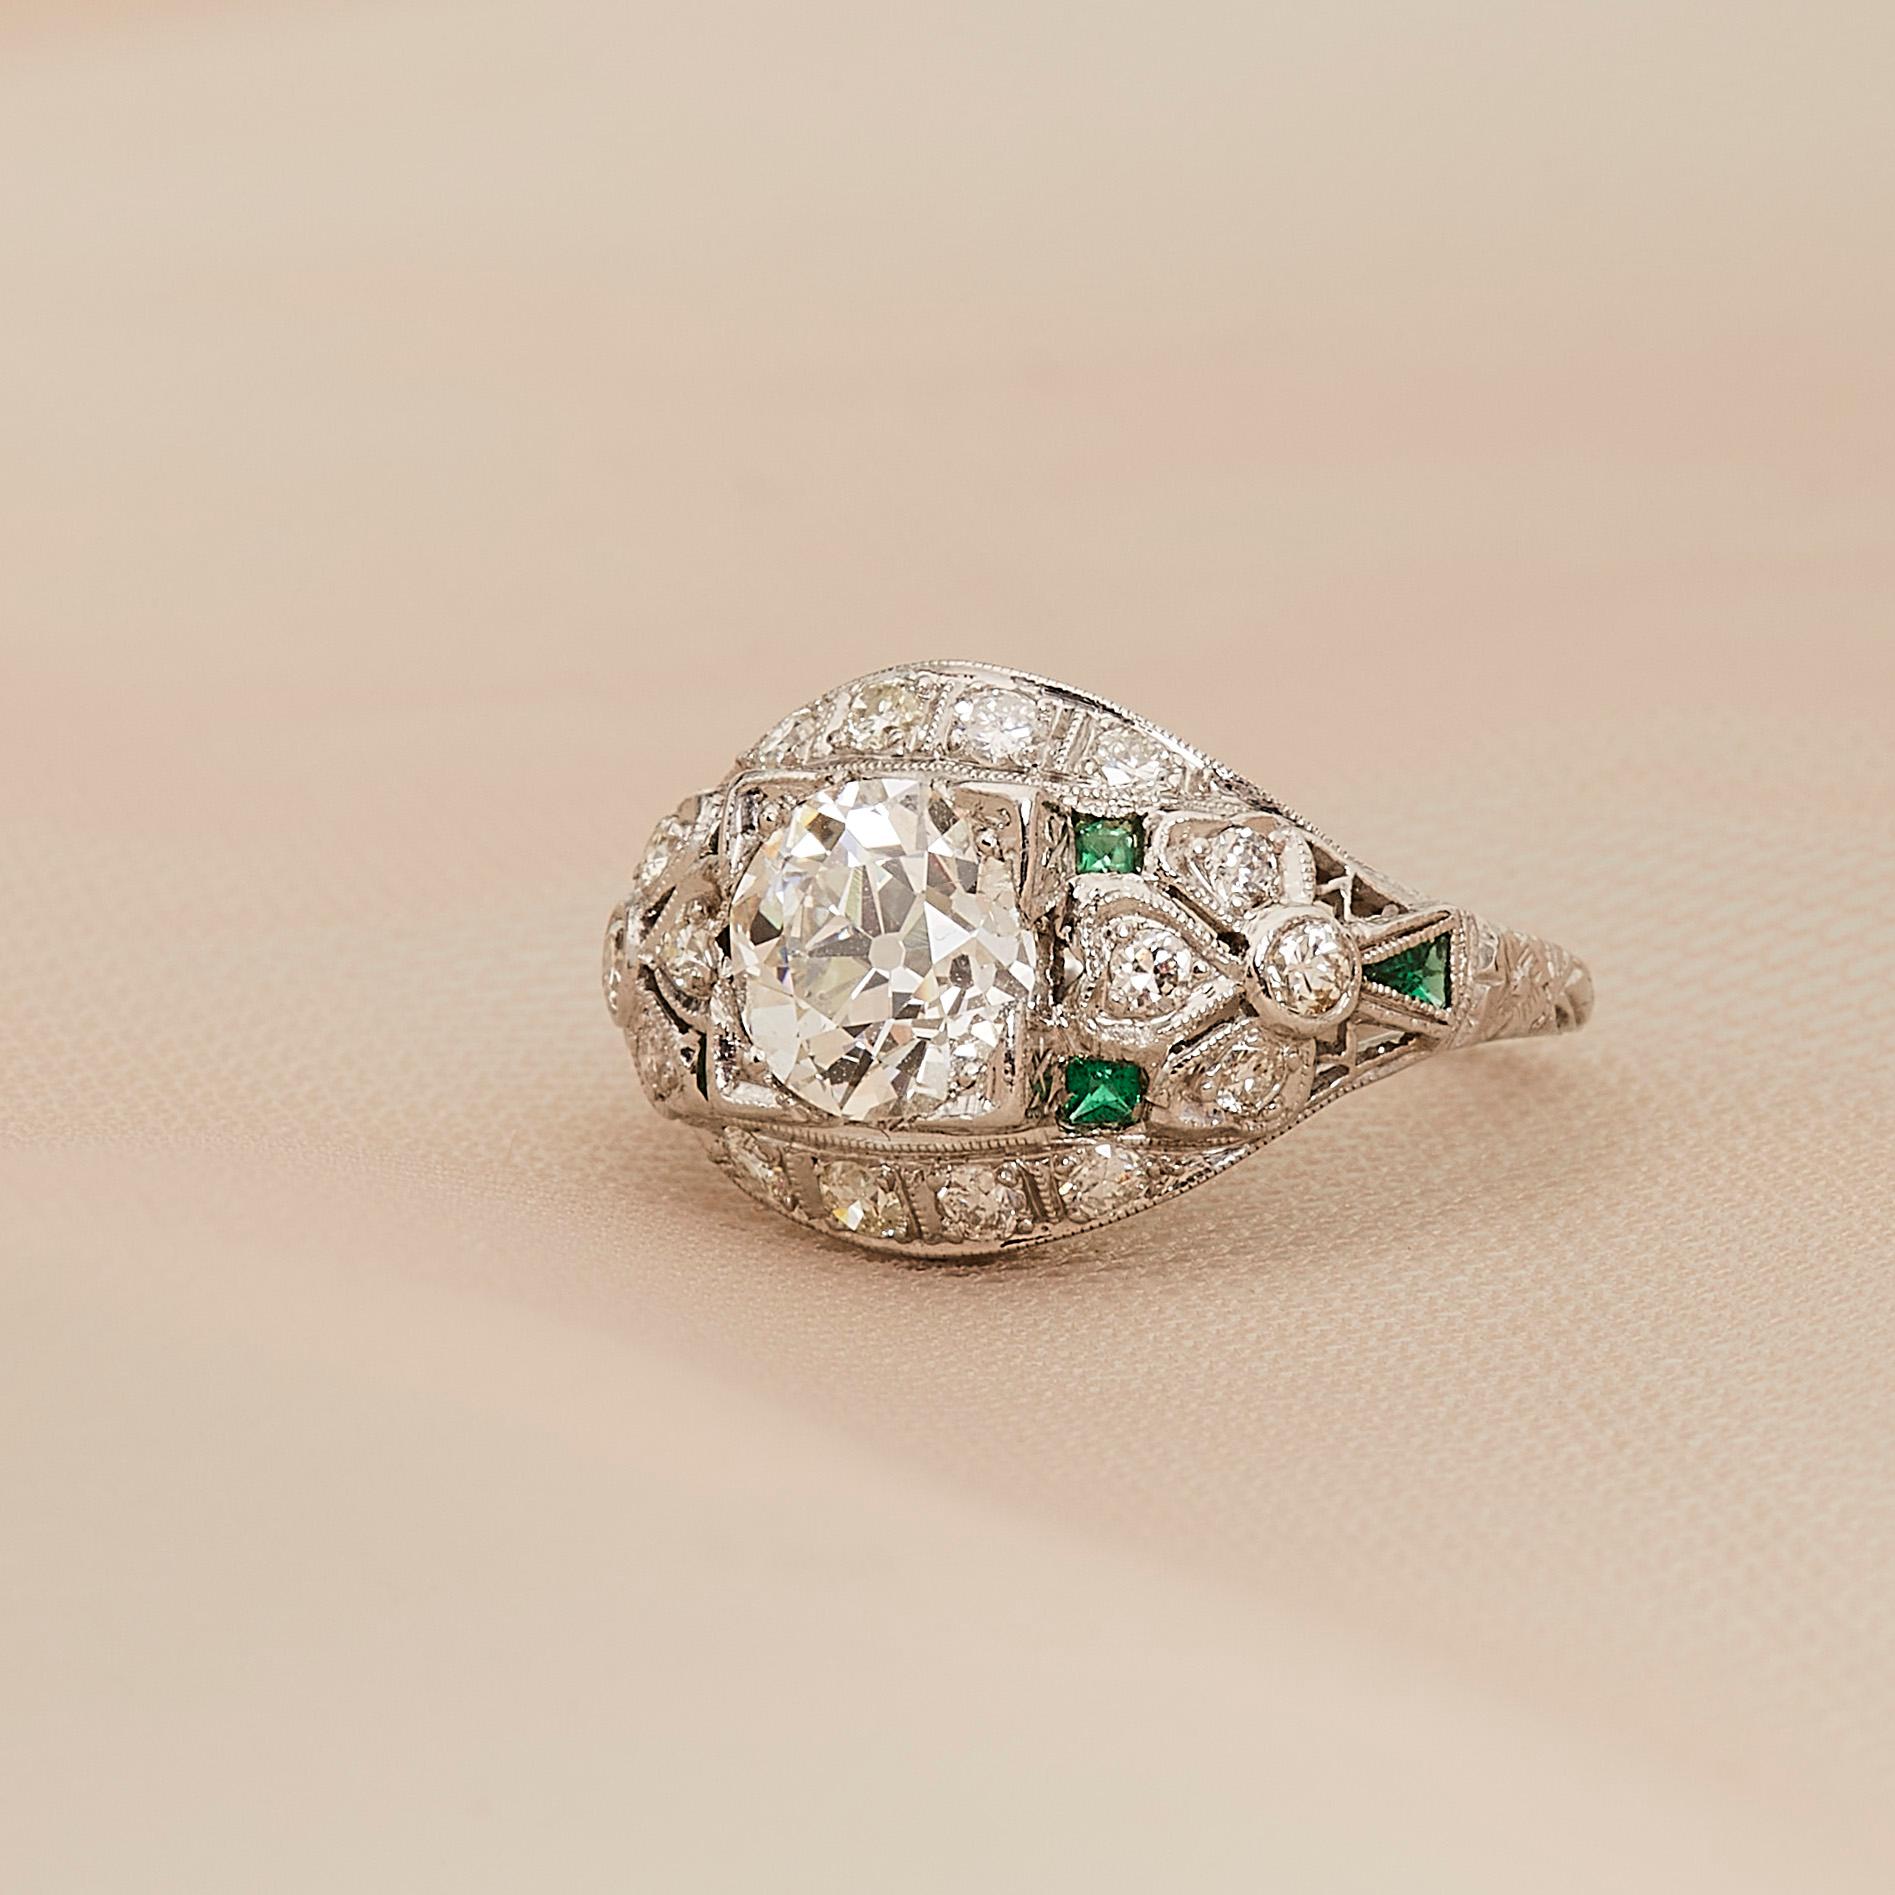 Art Deco 1.49 Ct. Diamond and Emerald Engagement Ring GIA J SI2, Platinum In Good Condition For Sale In New York, NY